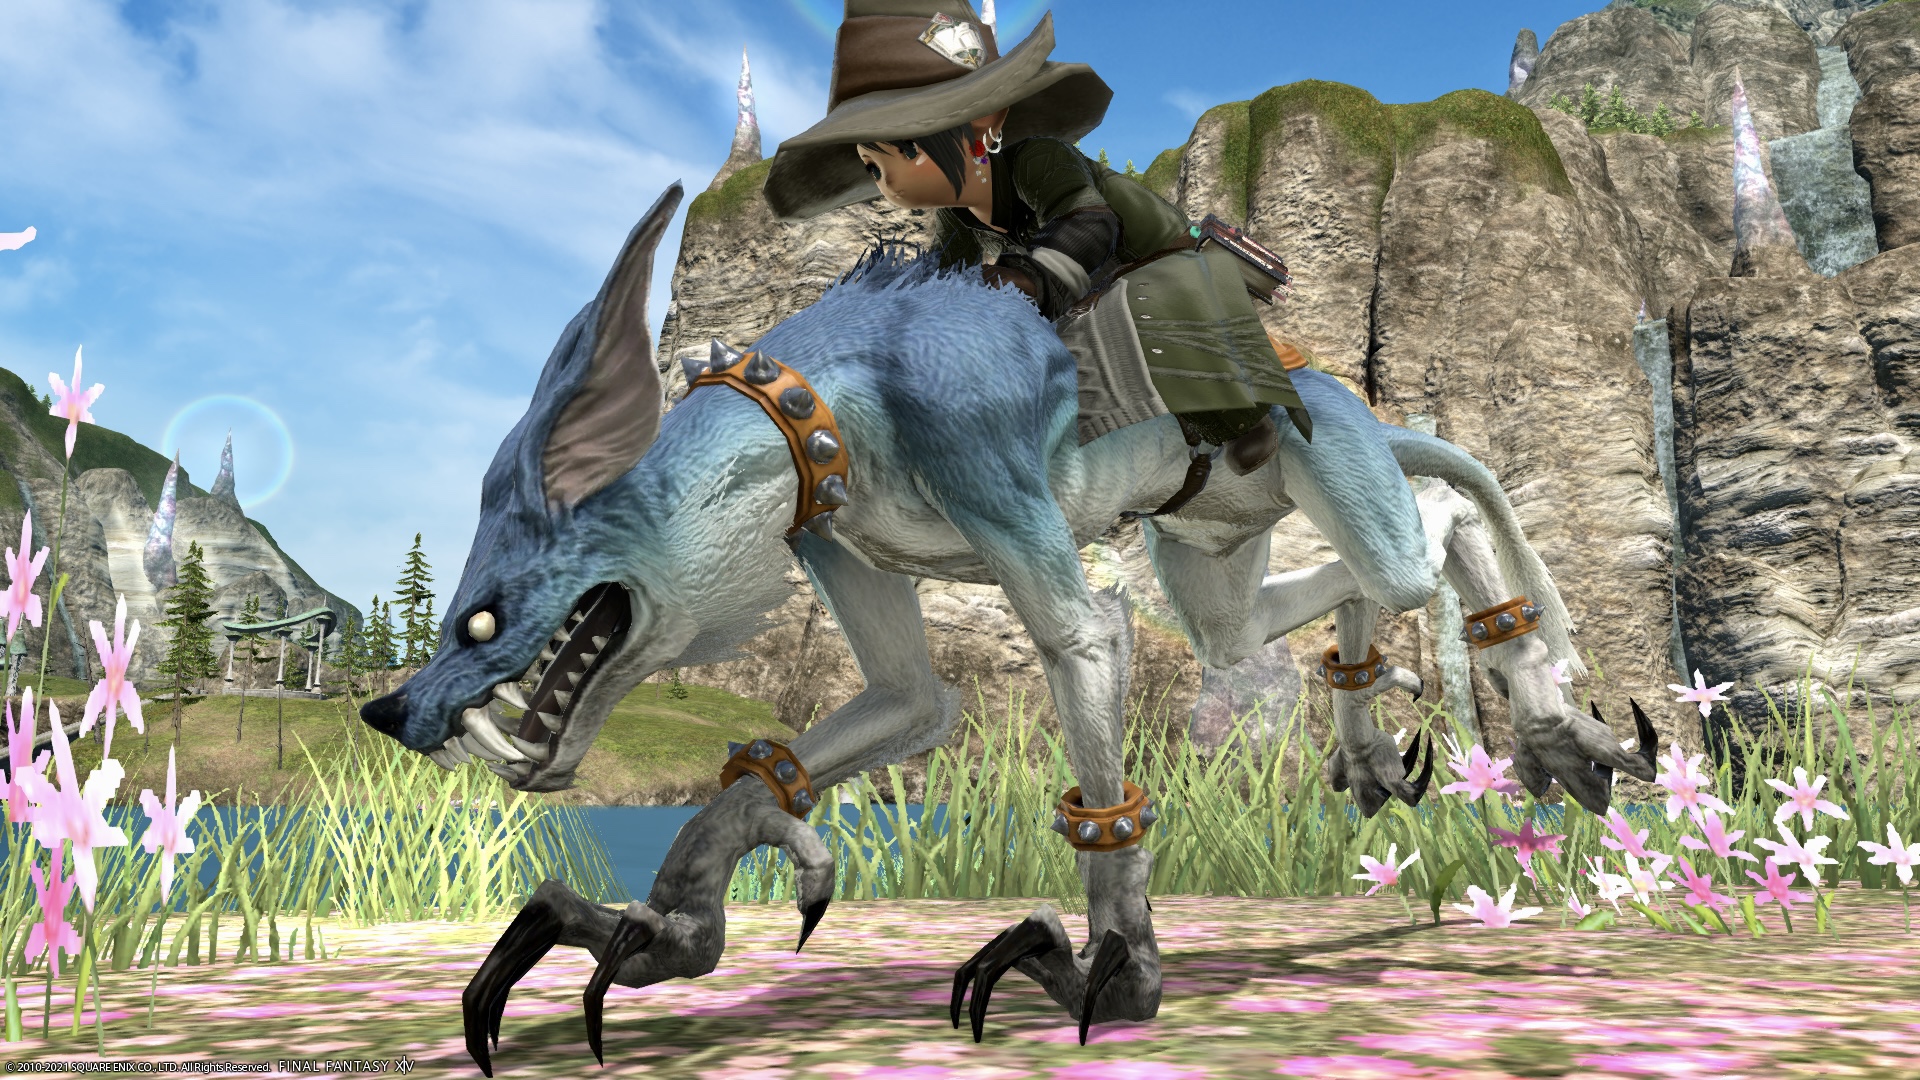 Gallery of Sirewolf Whistle Ff14.